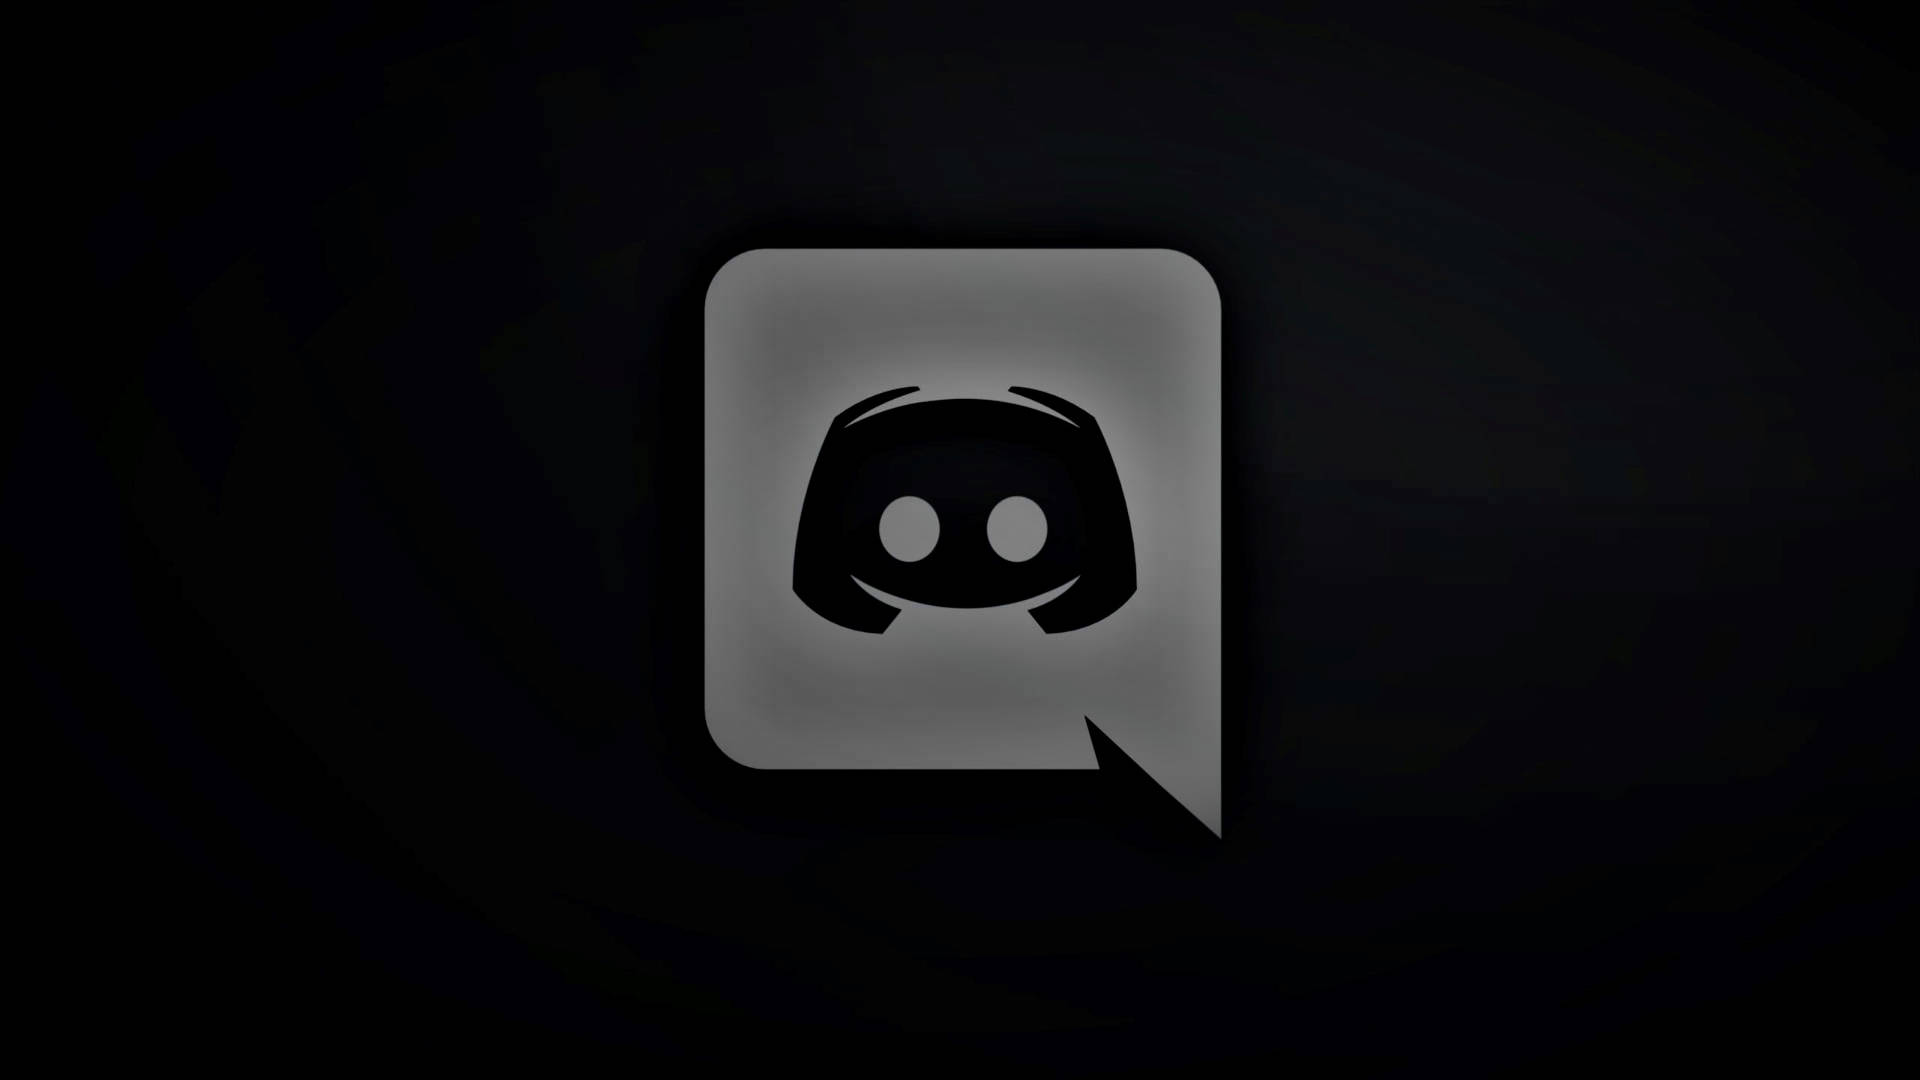 Abstract Black Aesthetic Discord Logo Background